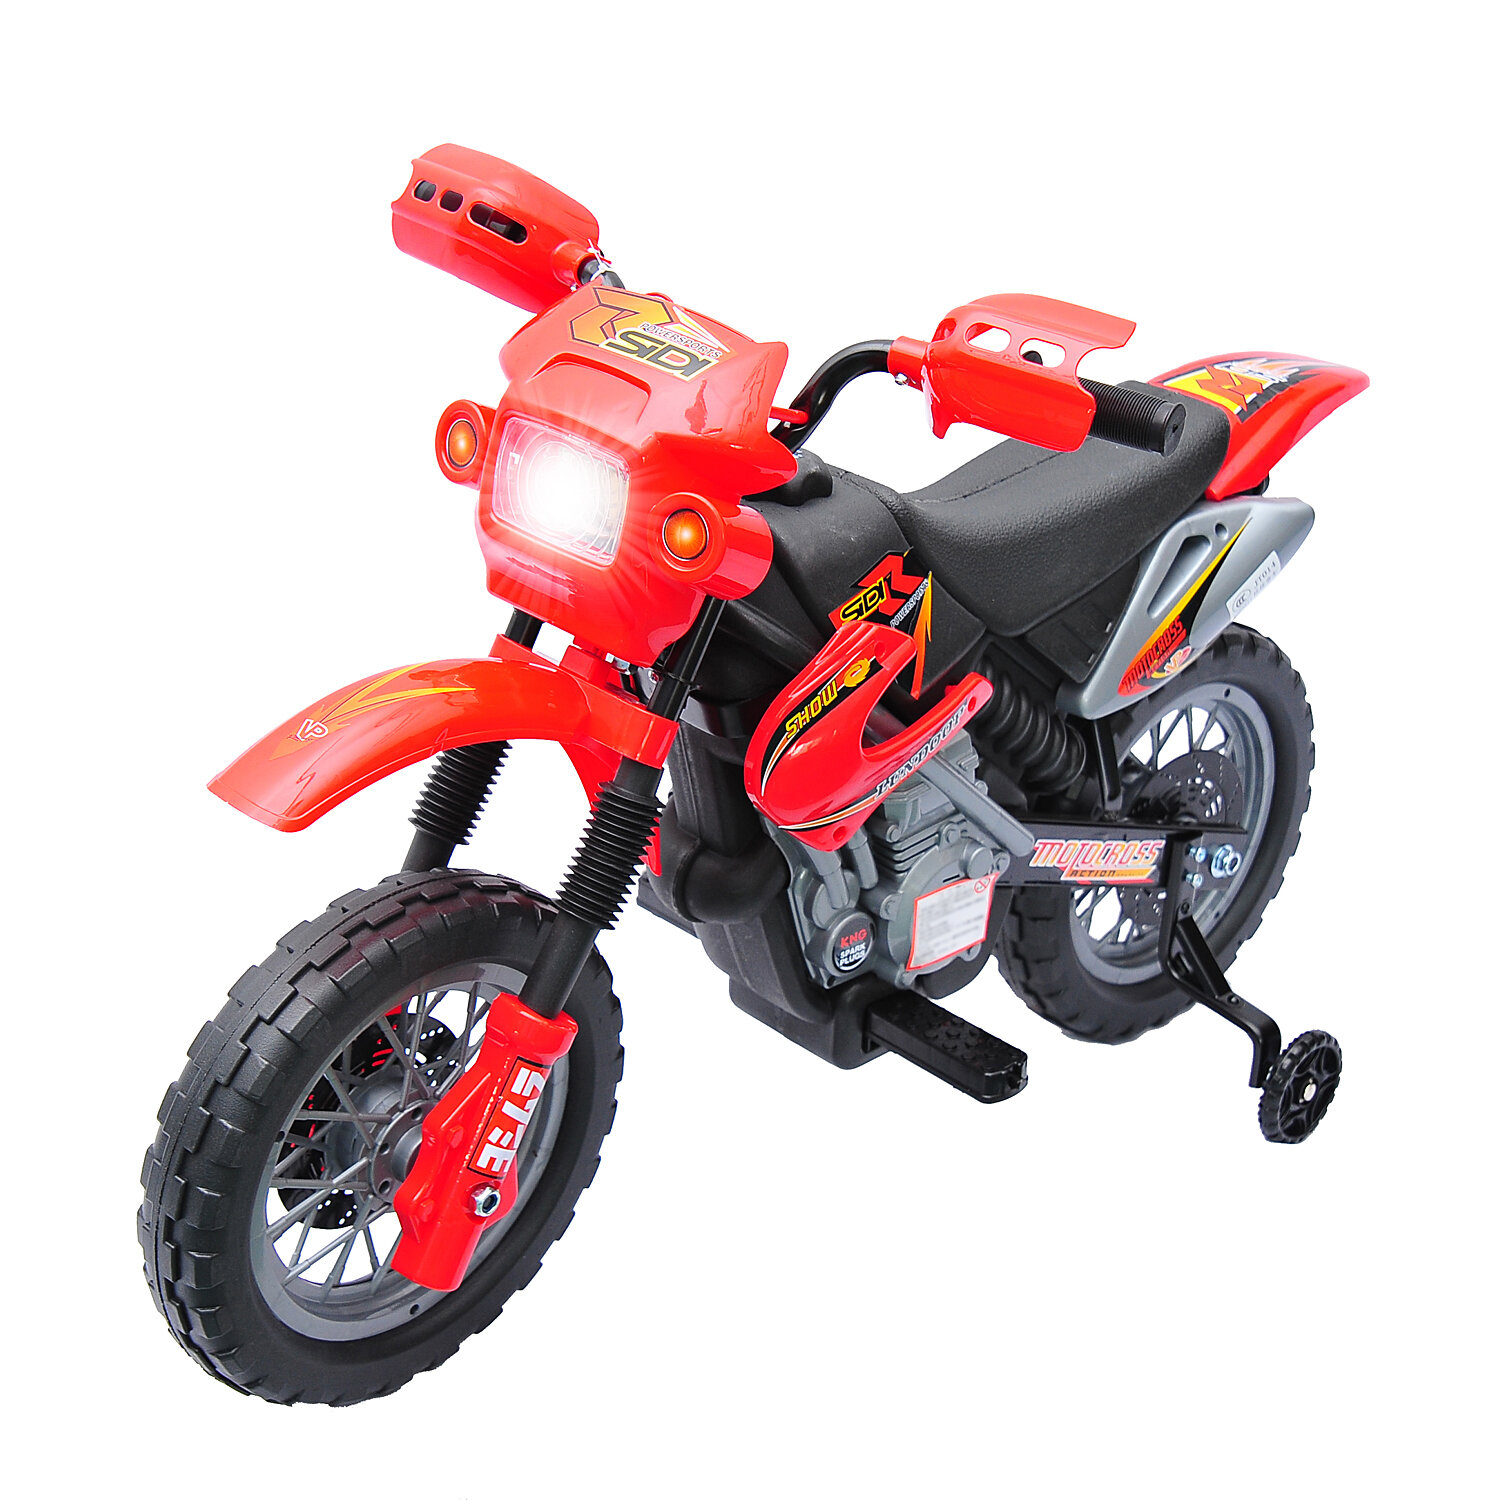 motorcycle for toddlers to ride